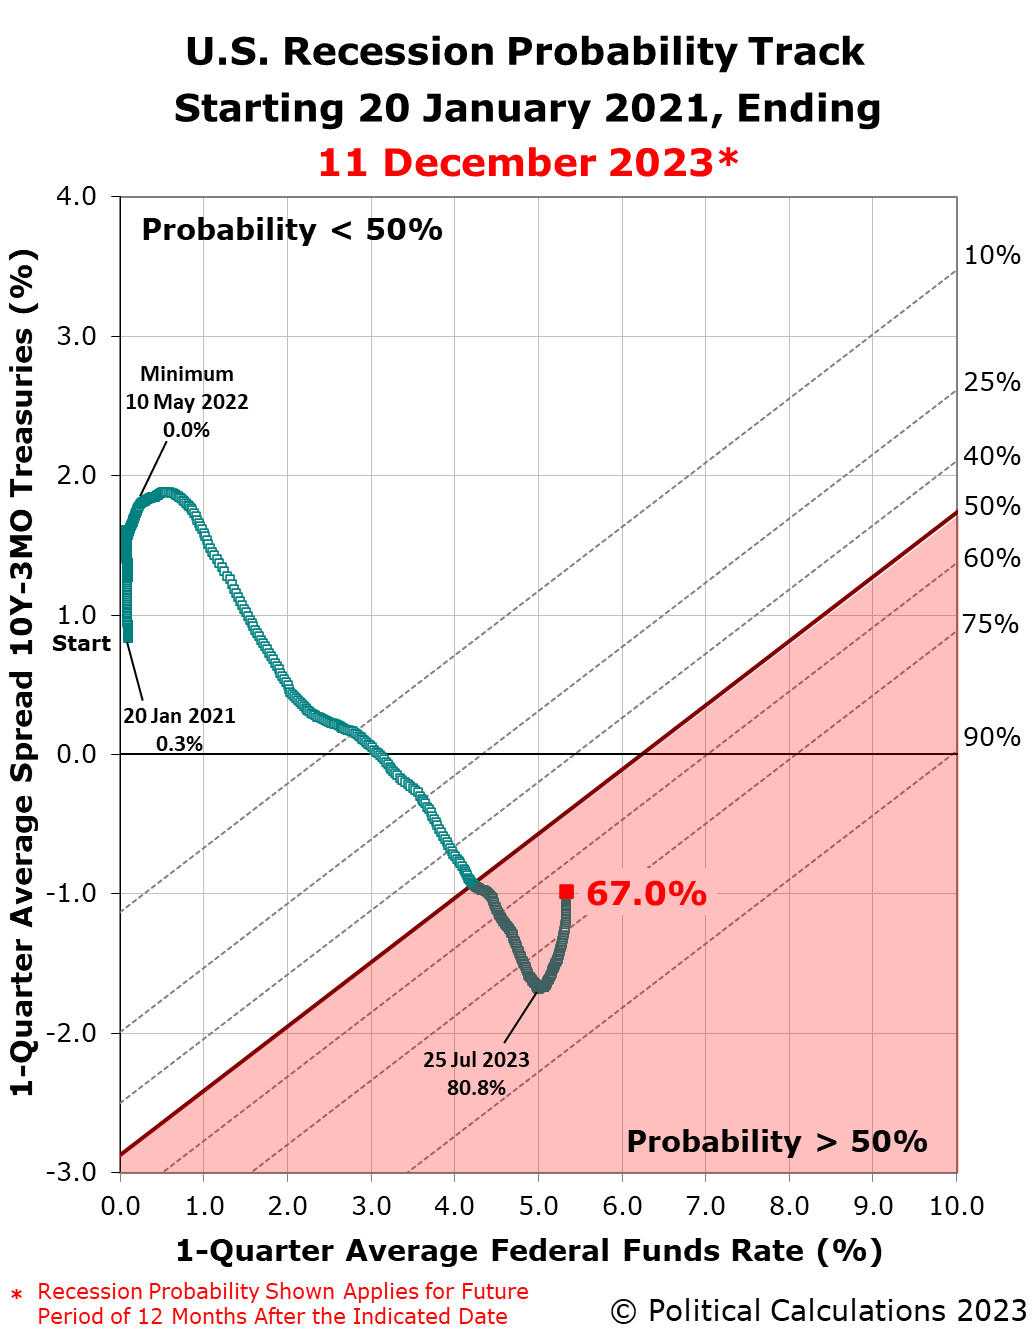 Recession Probability Track, 20 January 2021 through 11 December 2023